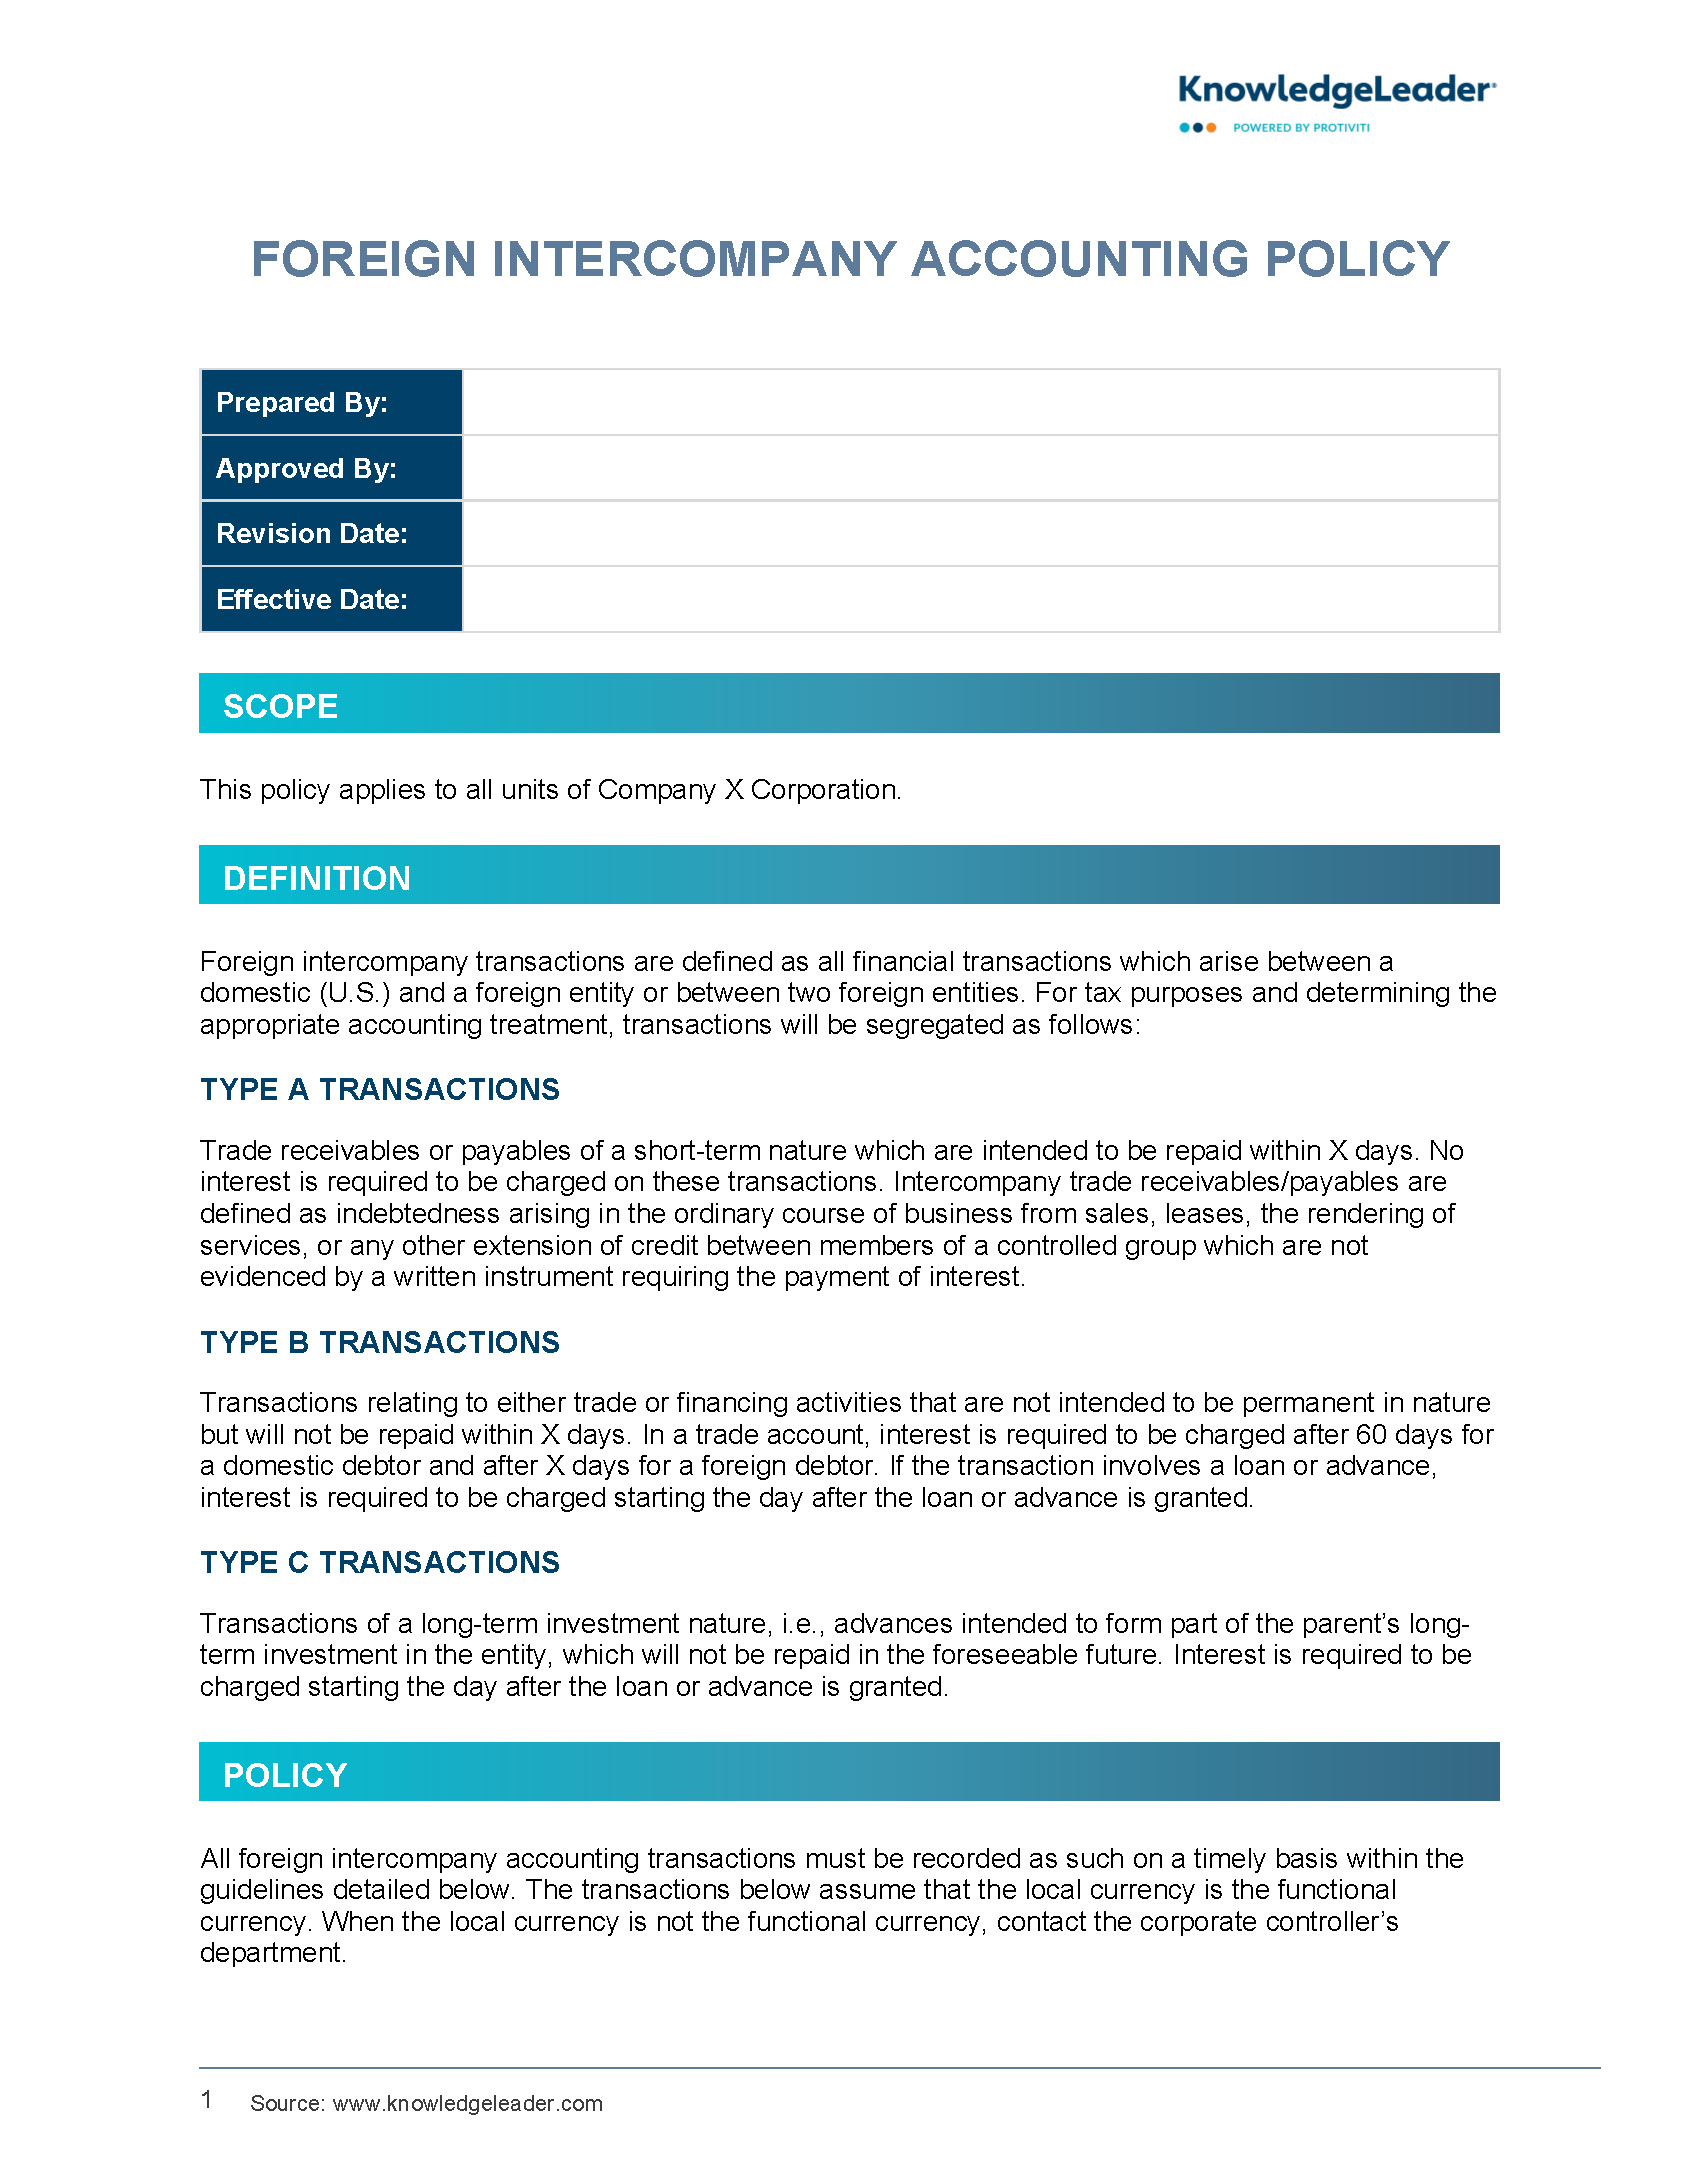 Foreign Intercompany Accounting Policy